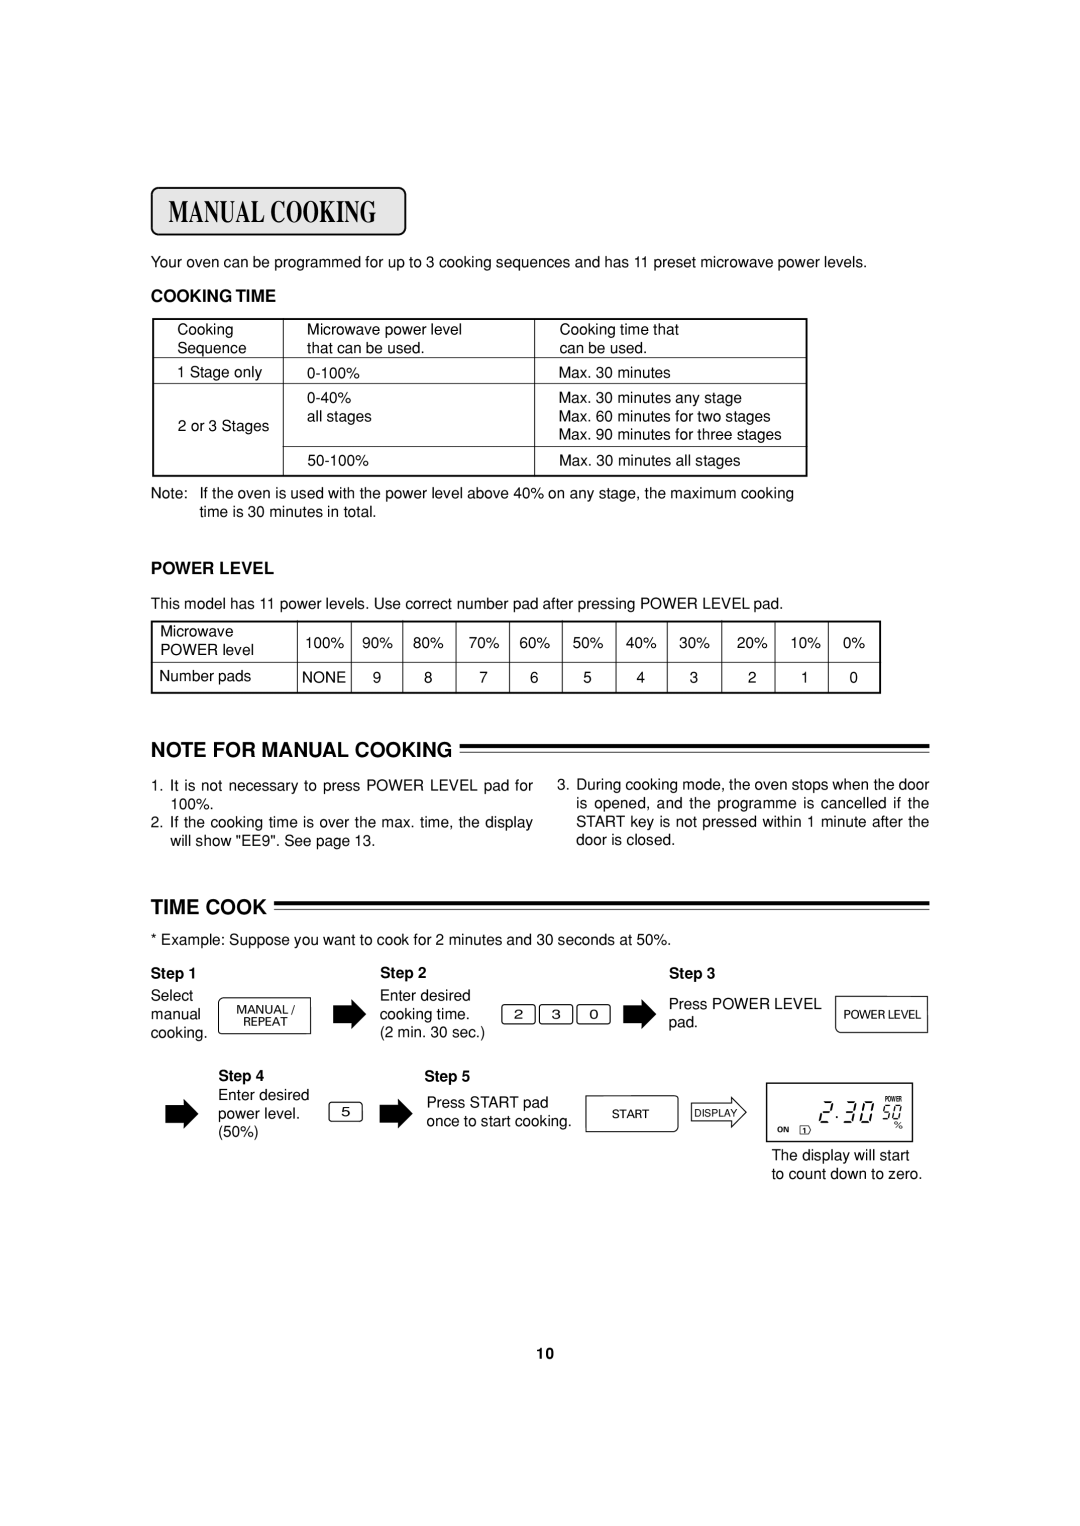 Sharp R-22AT, R-24AT operation manual Note For Manual Cooking, Time Cook, Step 